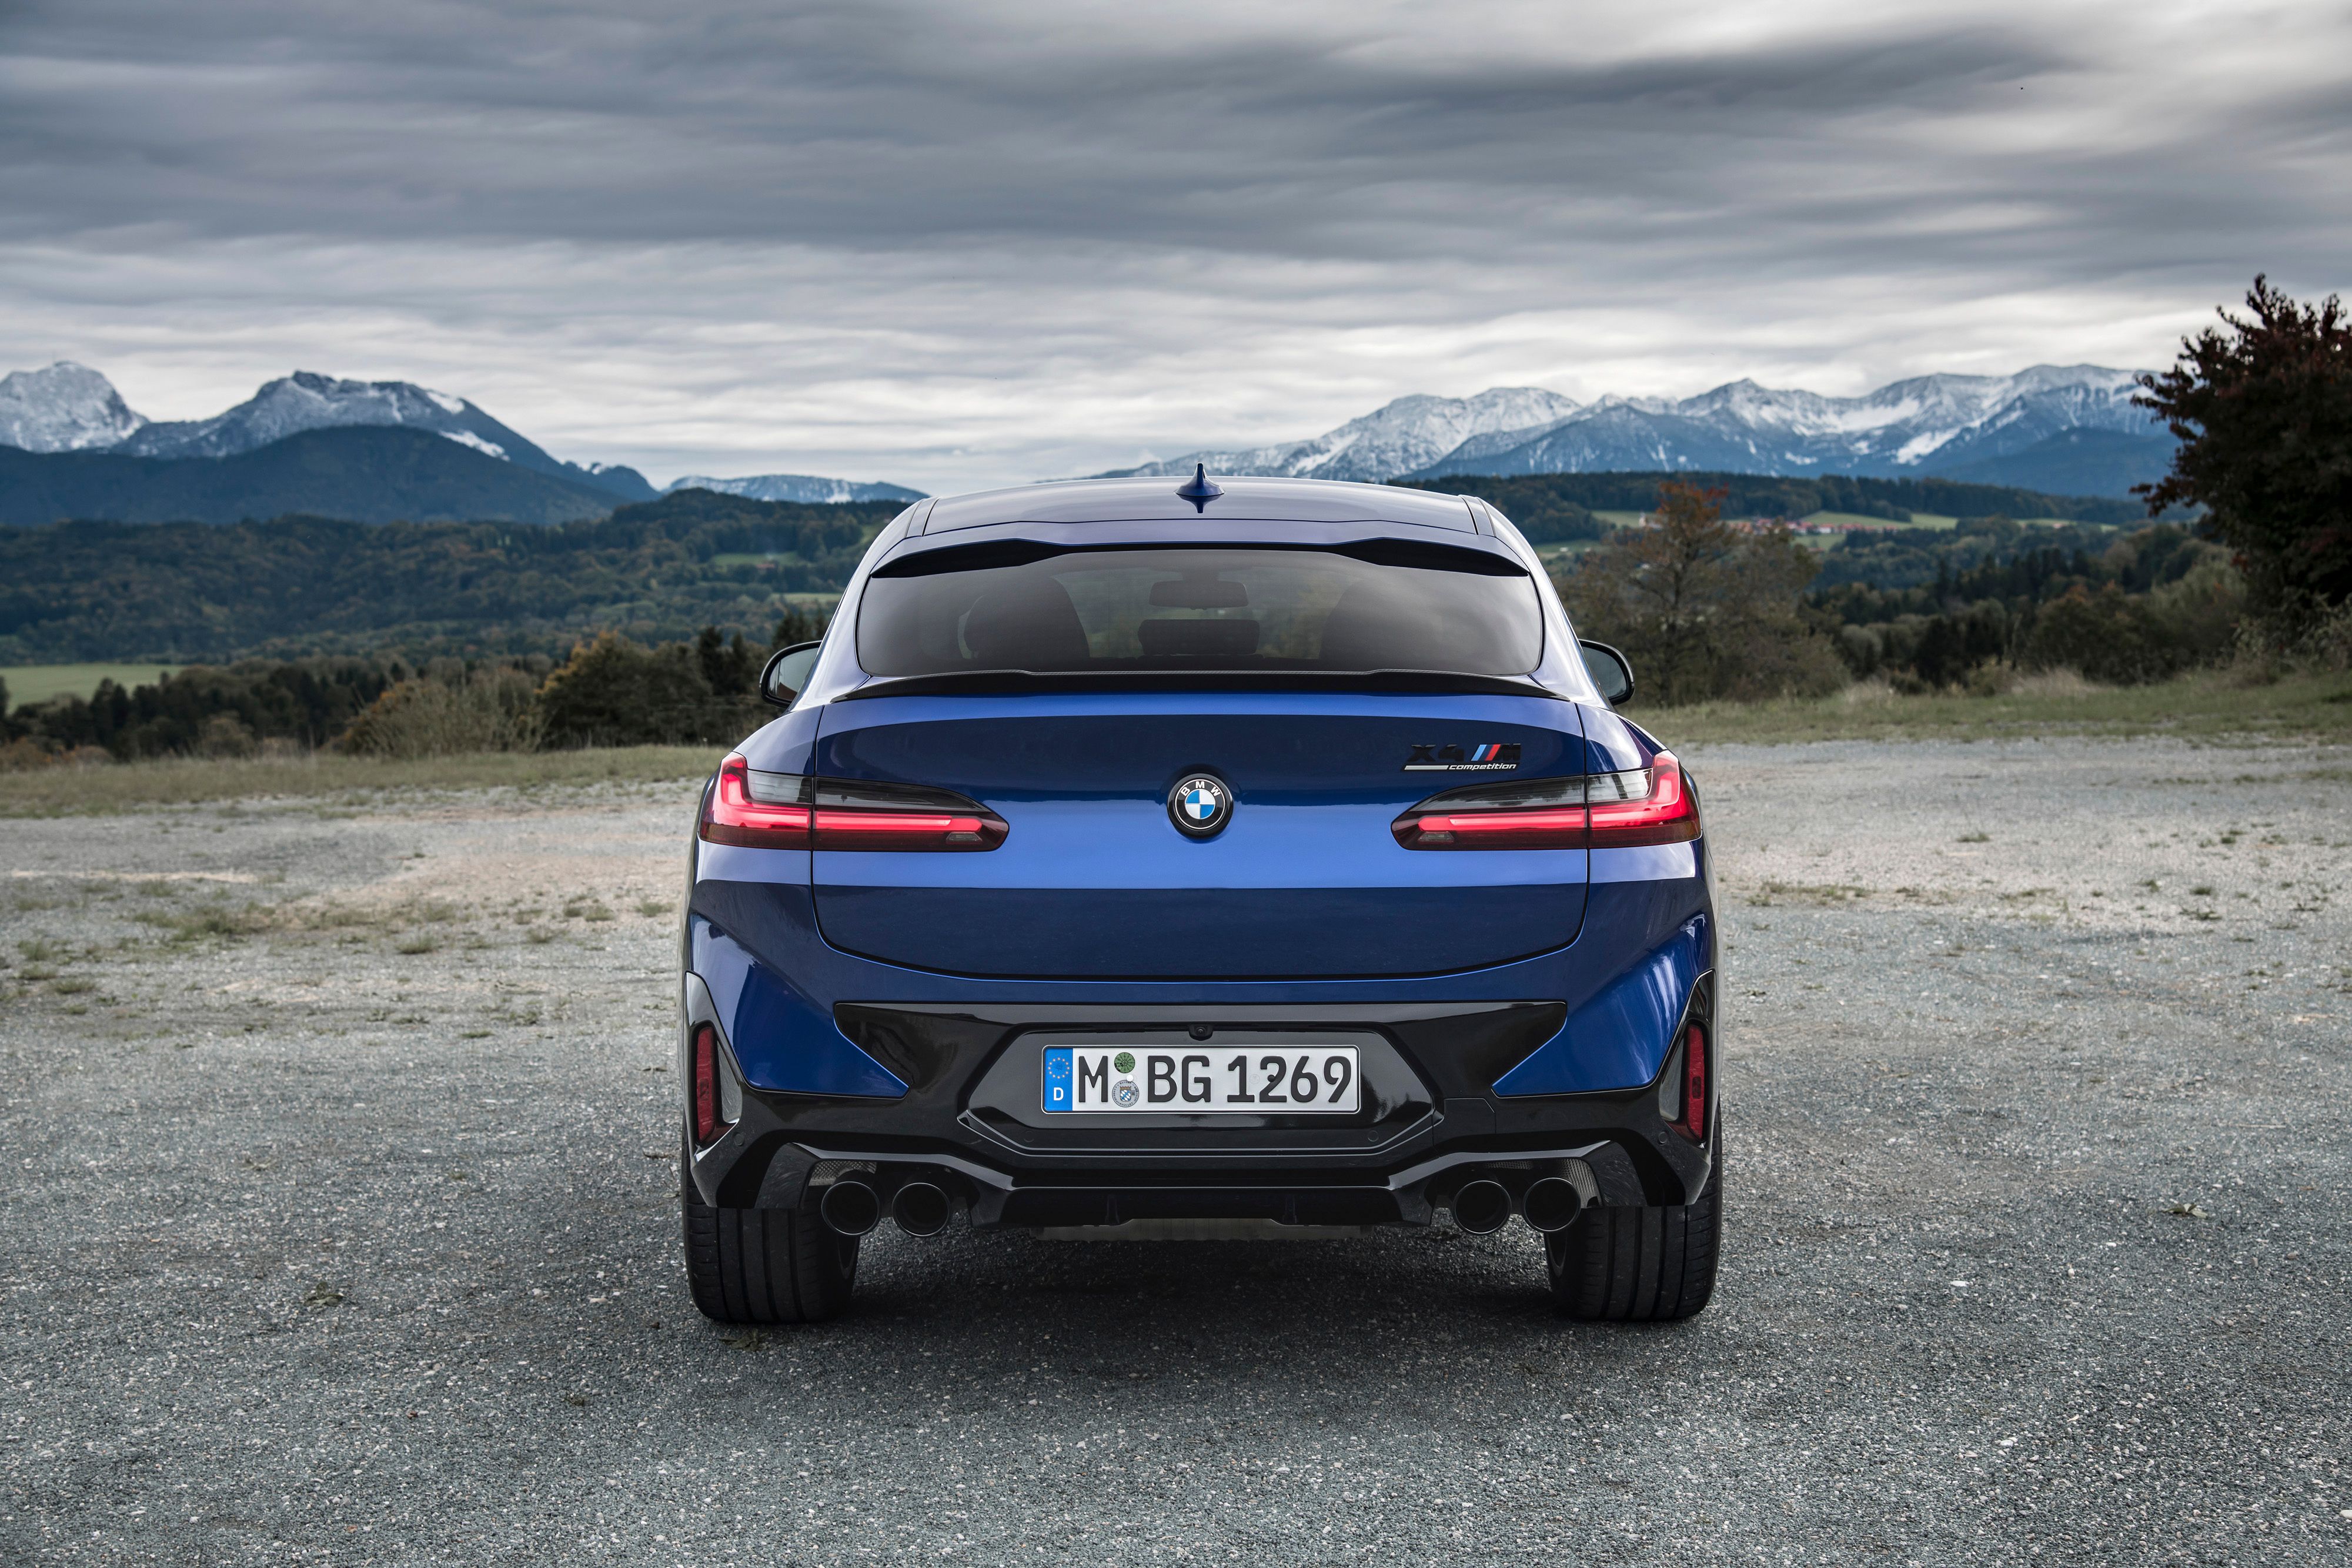 2022 BMW X4 M and X4 M Competition